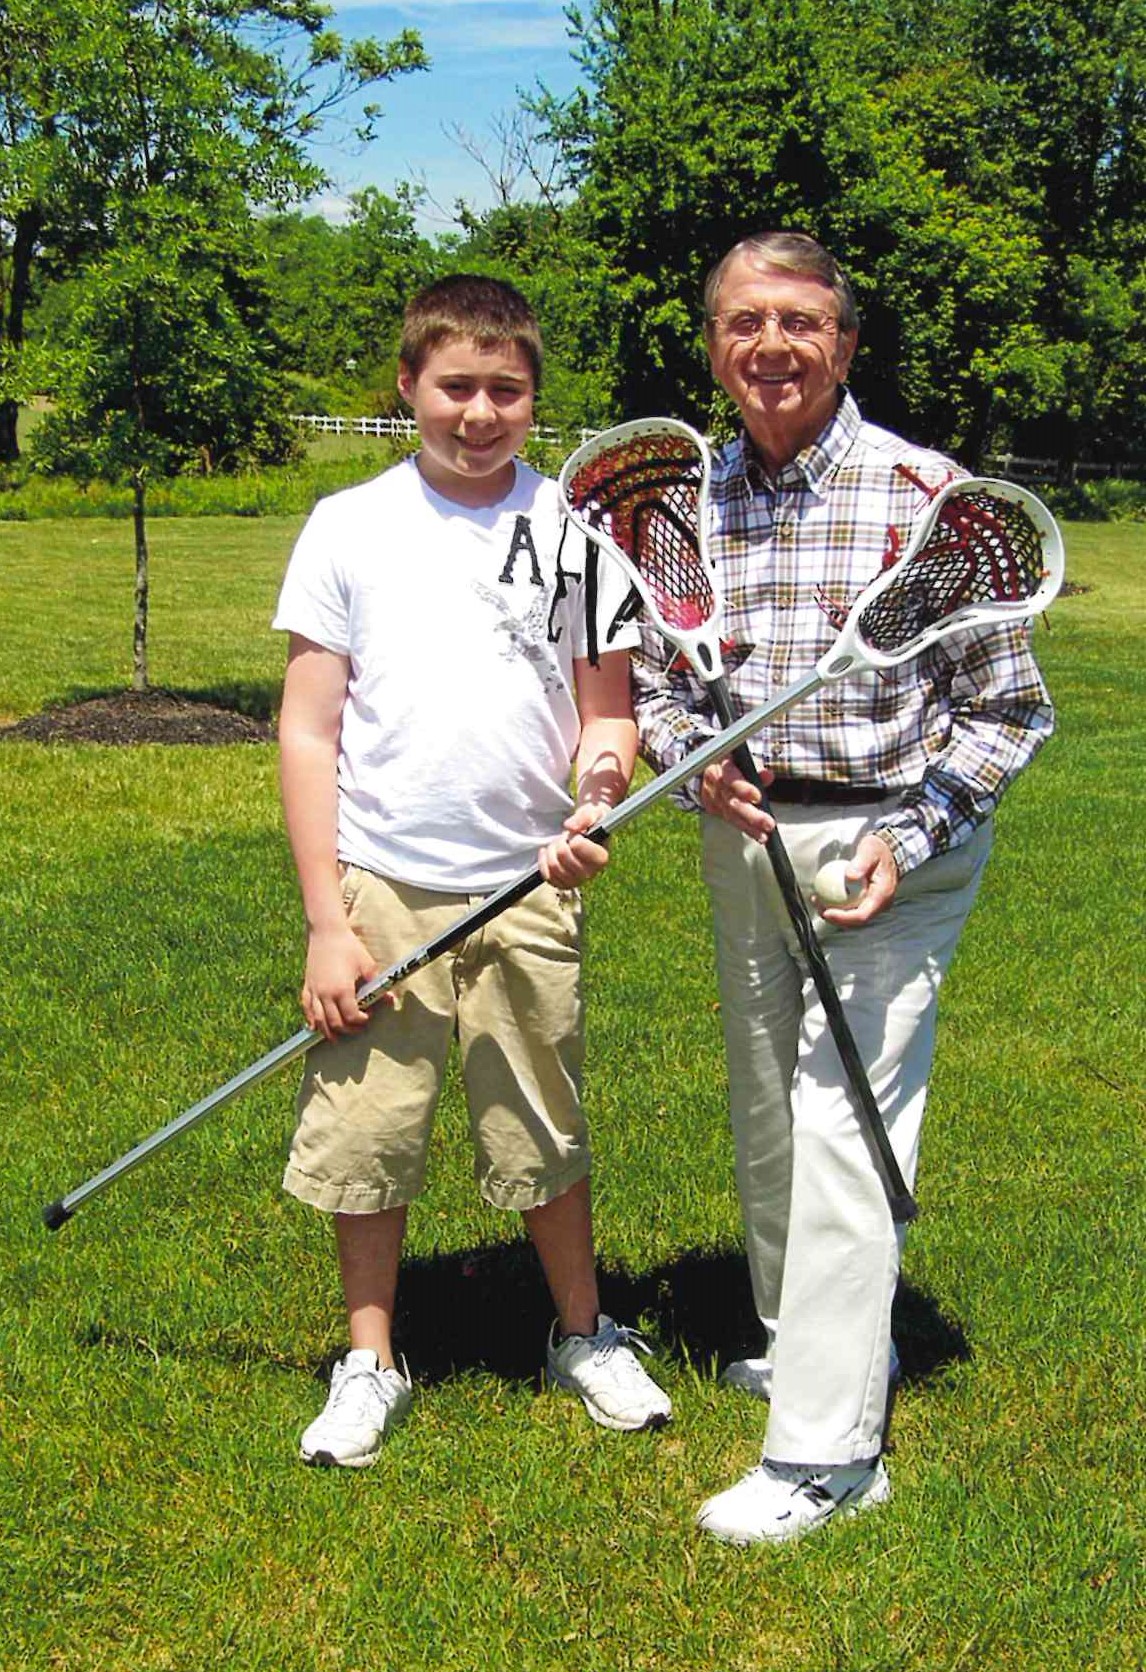 Lacrosse with George